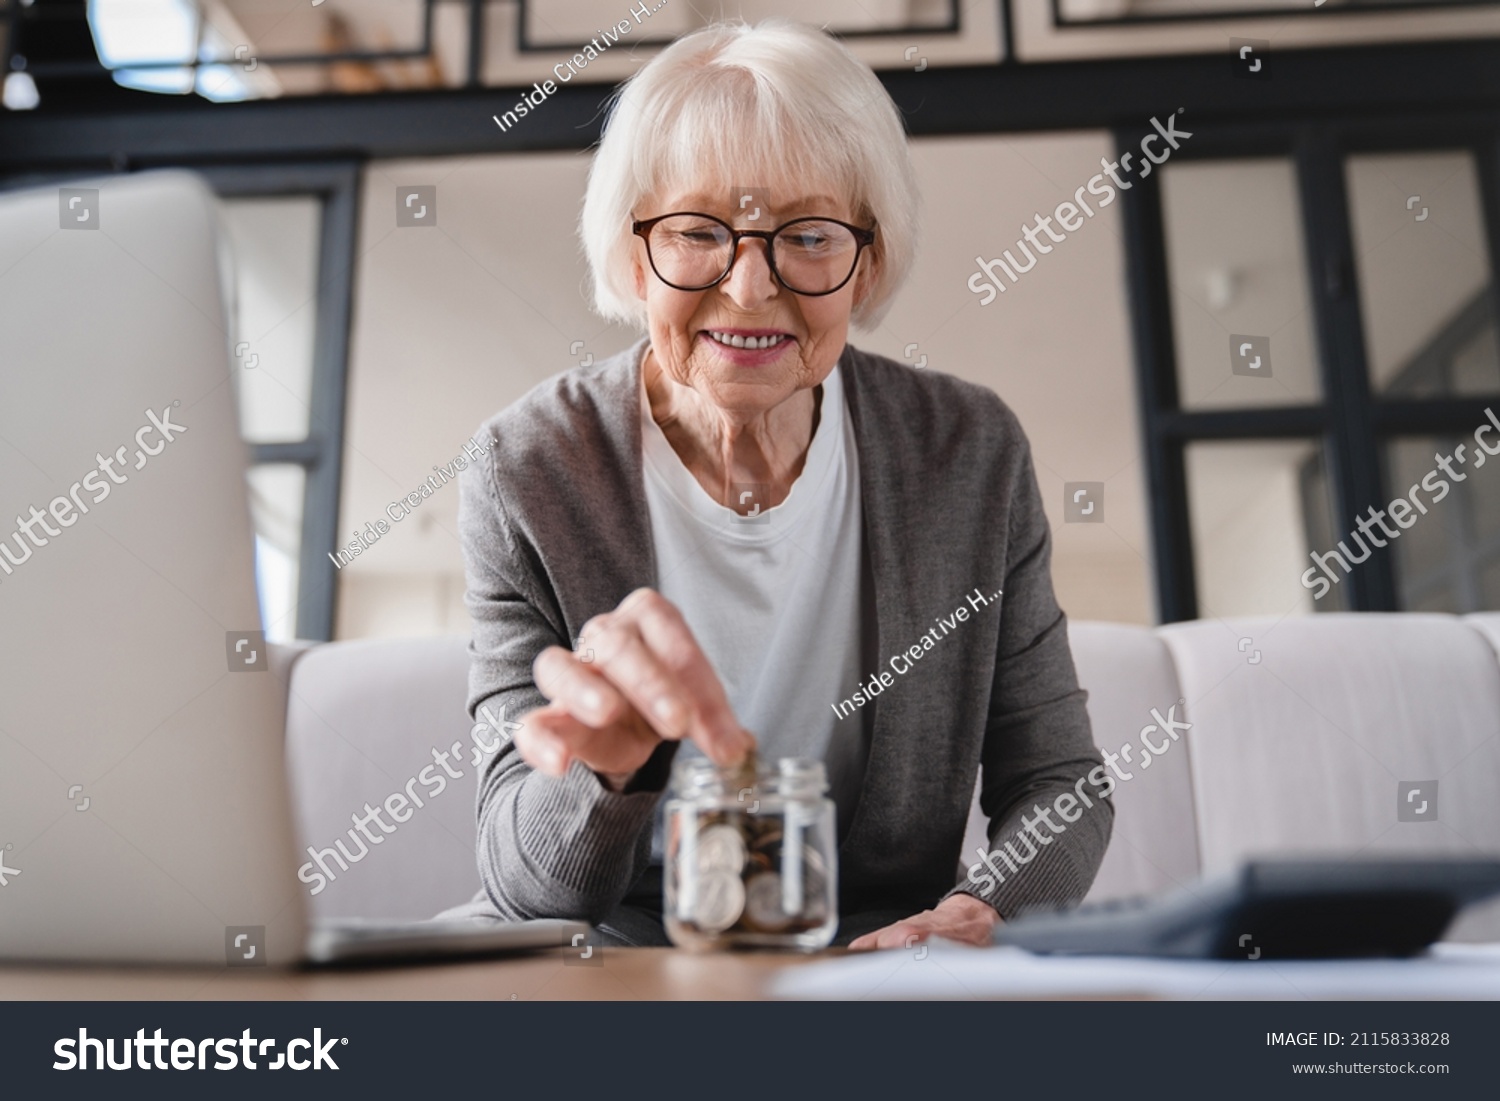 Savings concept. Nest egg of old elderly senior woman grandmother saving money, economizing pension, mortgage loan at home using laptop and putting coin into moneybox #2115833828